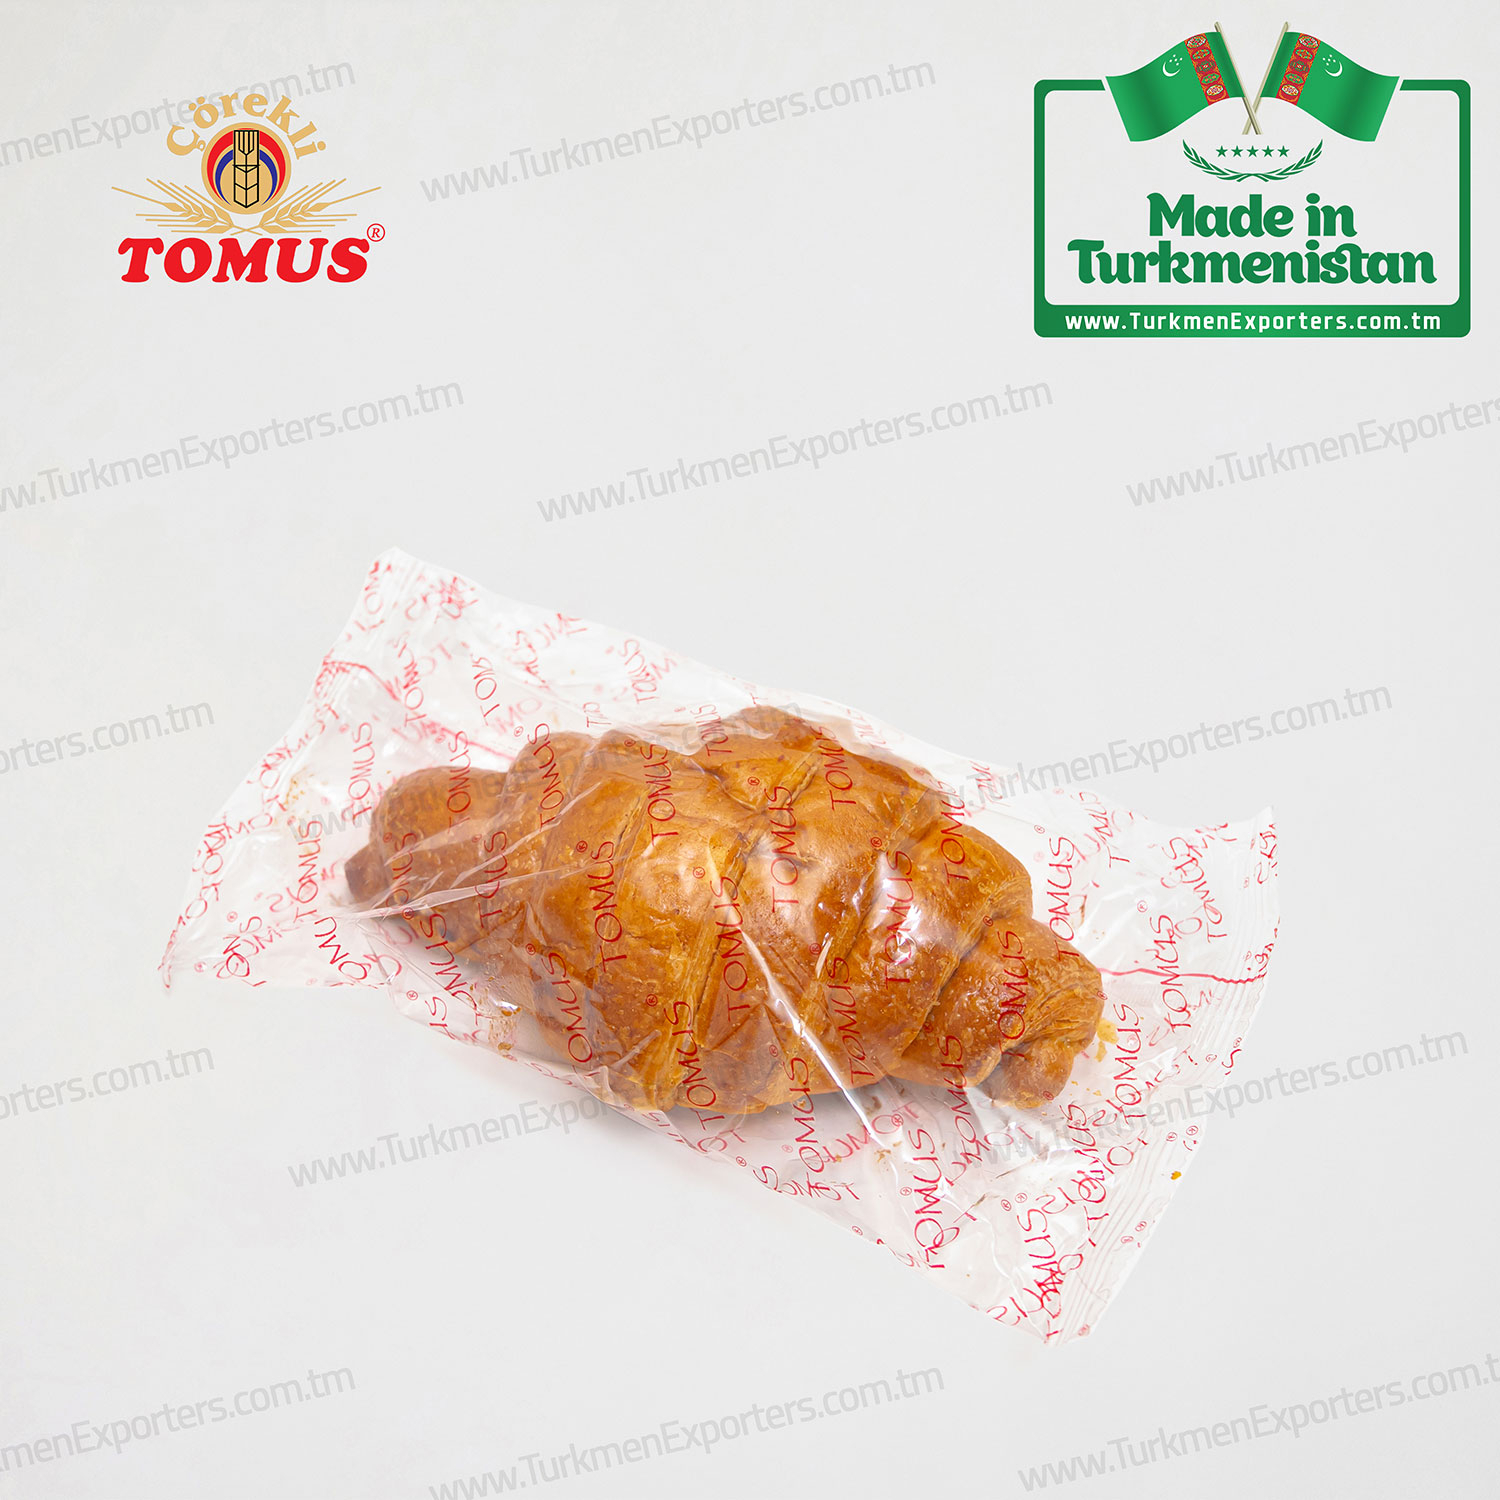 Croissant Made in Turkmenistan | Tomus bakery factory 